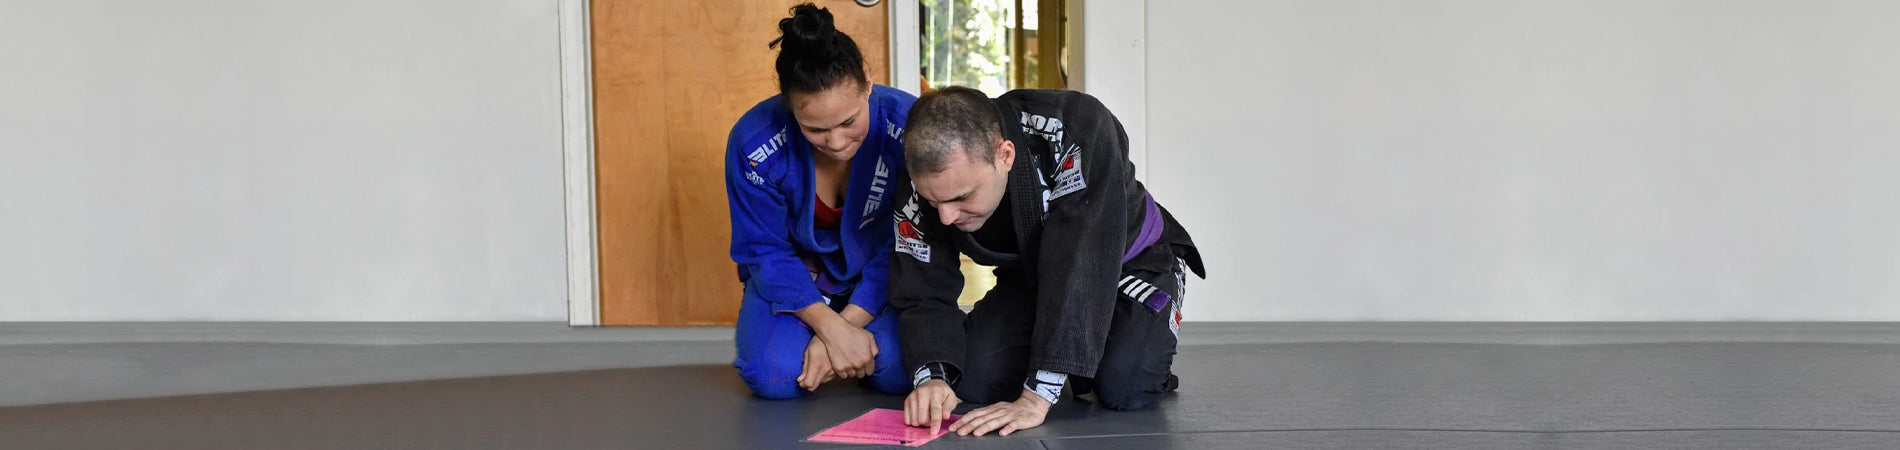 Do's and Don'ts For BJJ Gear Promotion